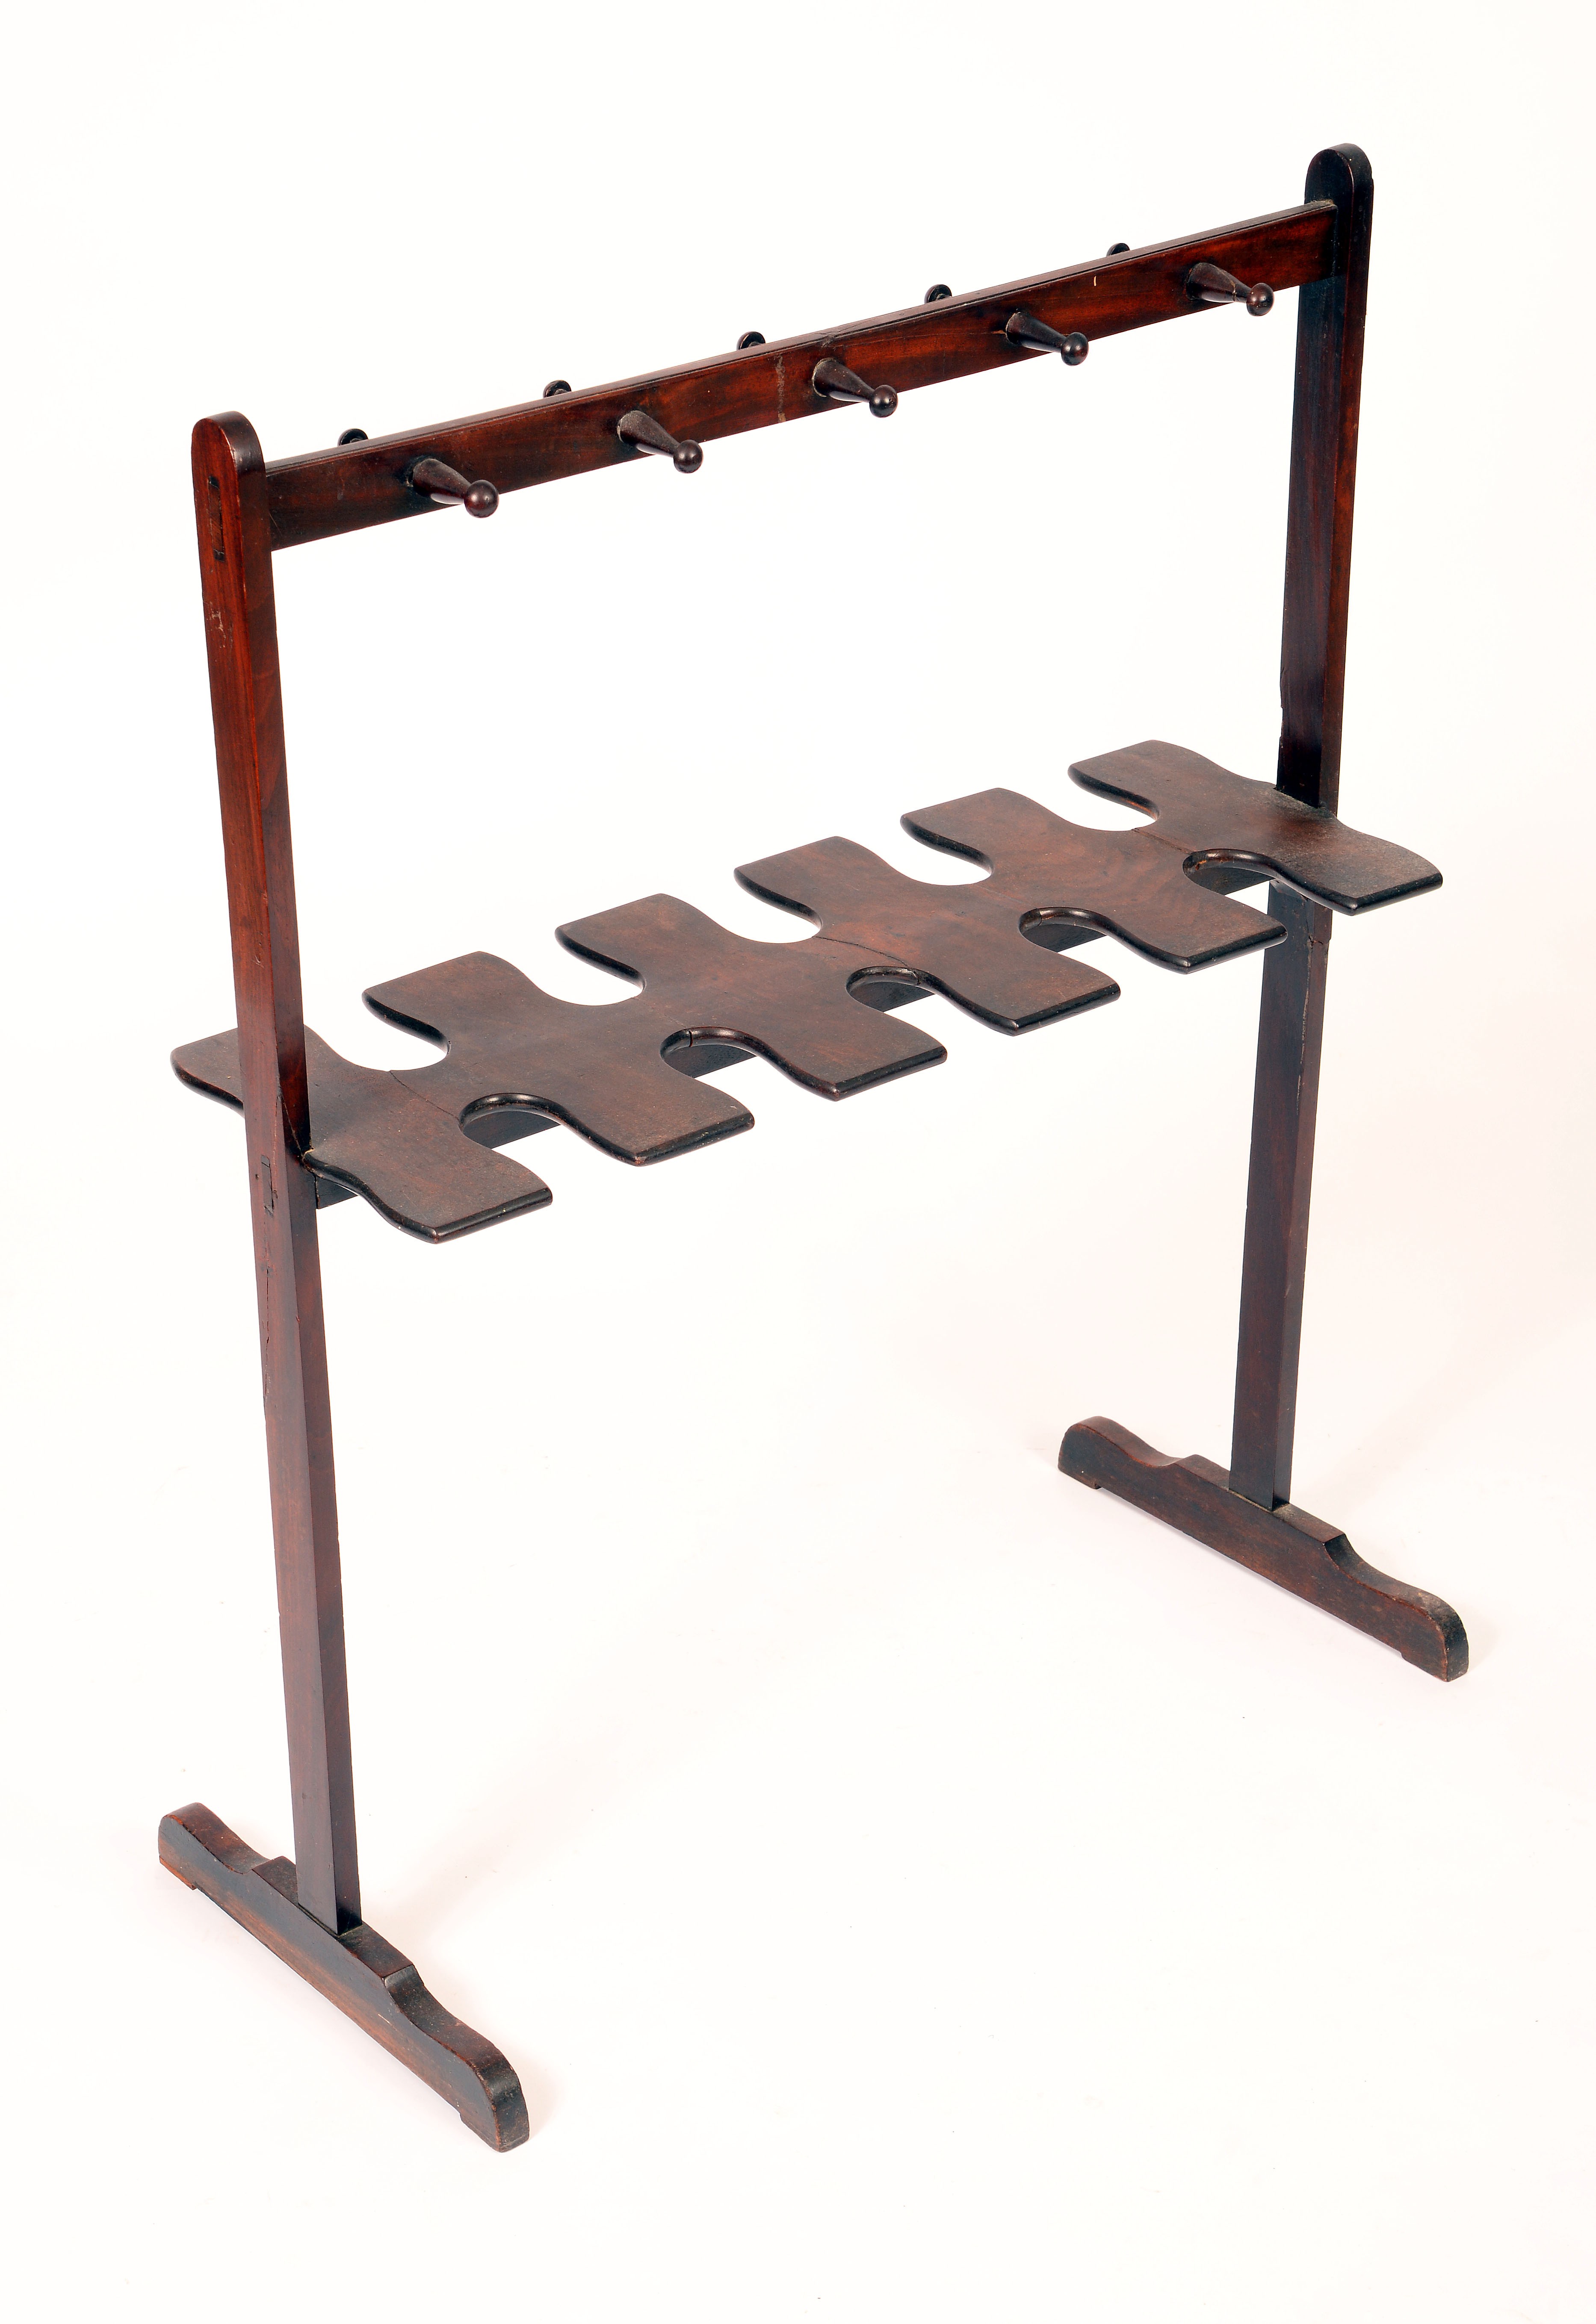 A 19th century mahogany riding boot and whip rack, turned pegs and shaped apertures, sledge base,